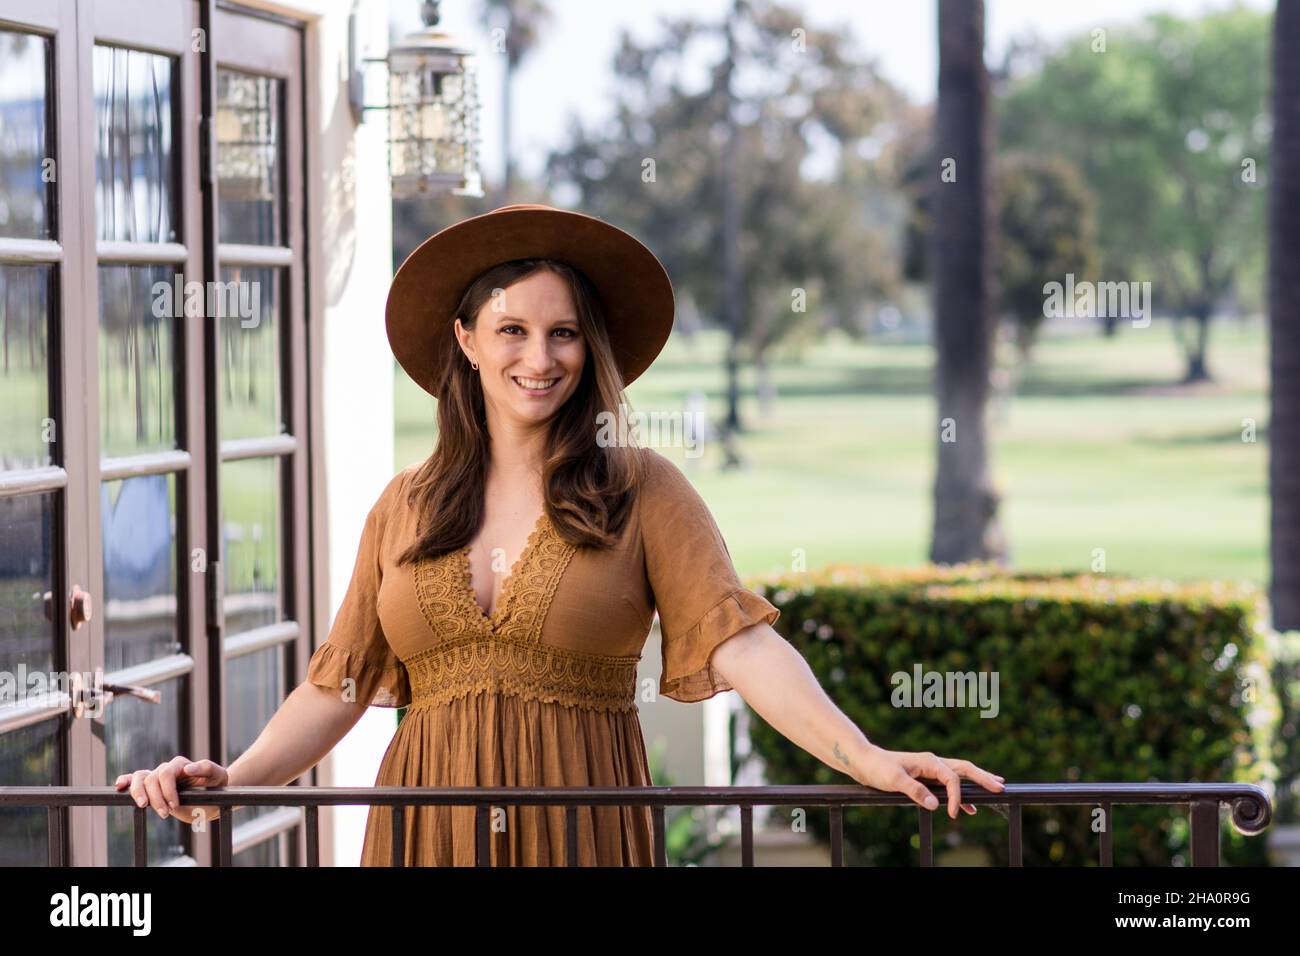 Smiling woman in brown dress & a hipster hat with hands on railing Stock Photo